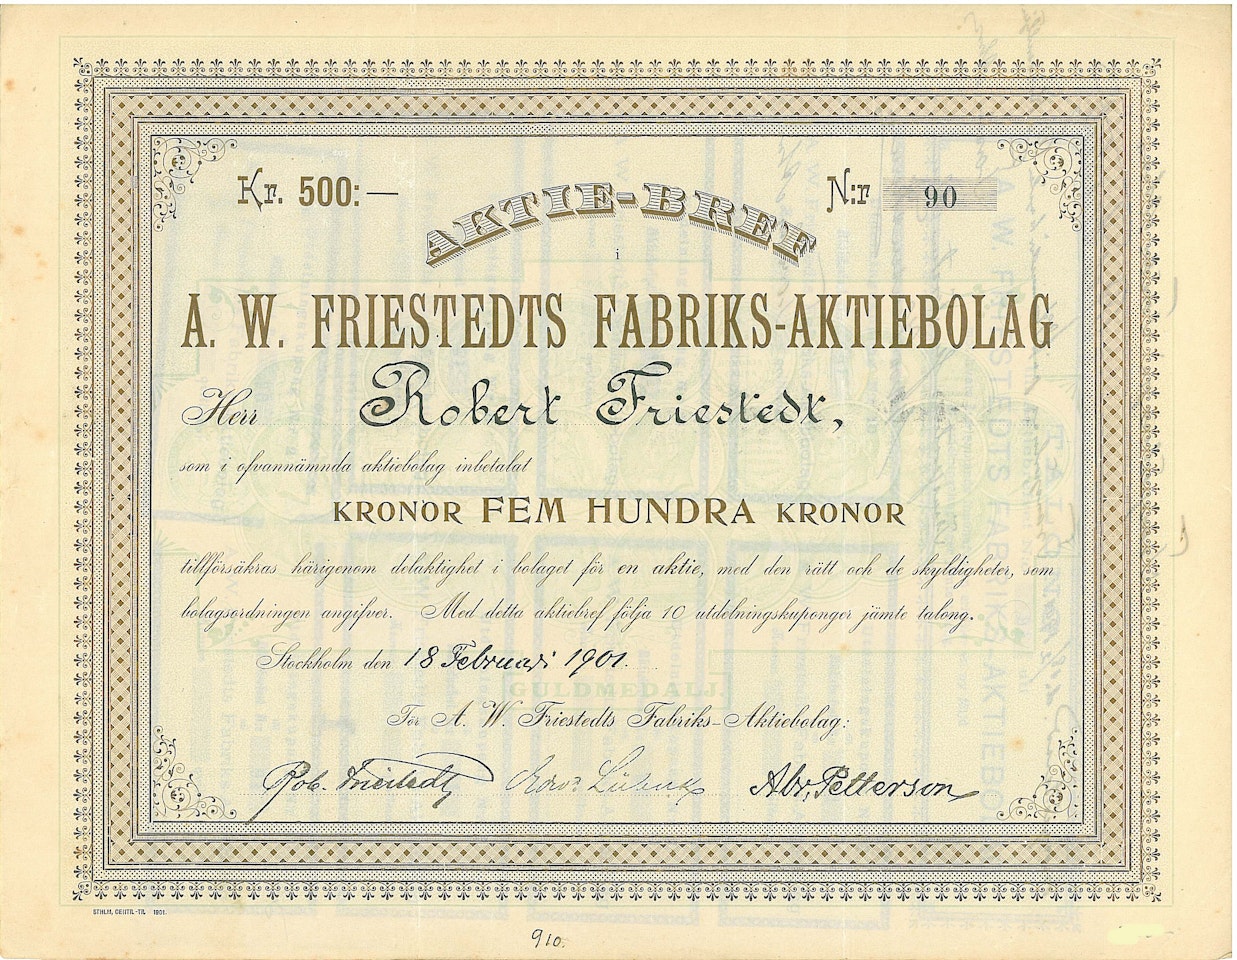 A.W. Friestedts Fabriks AB